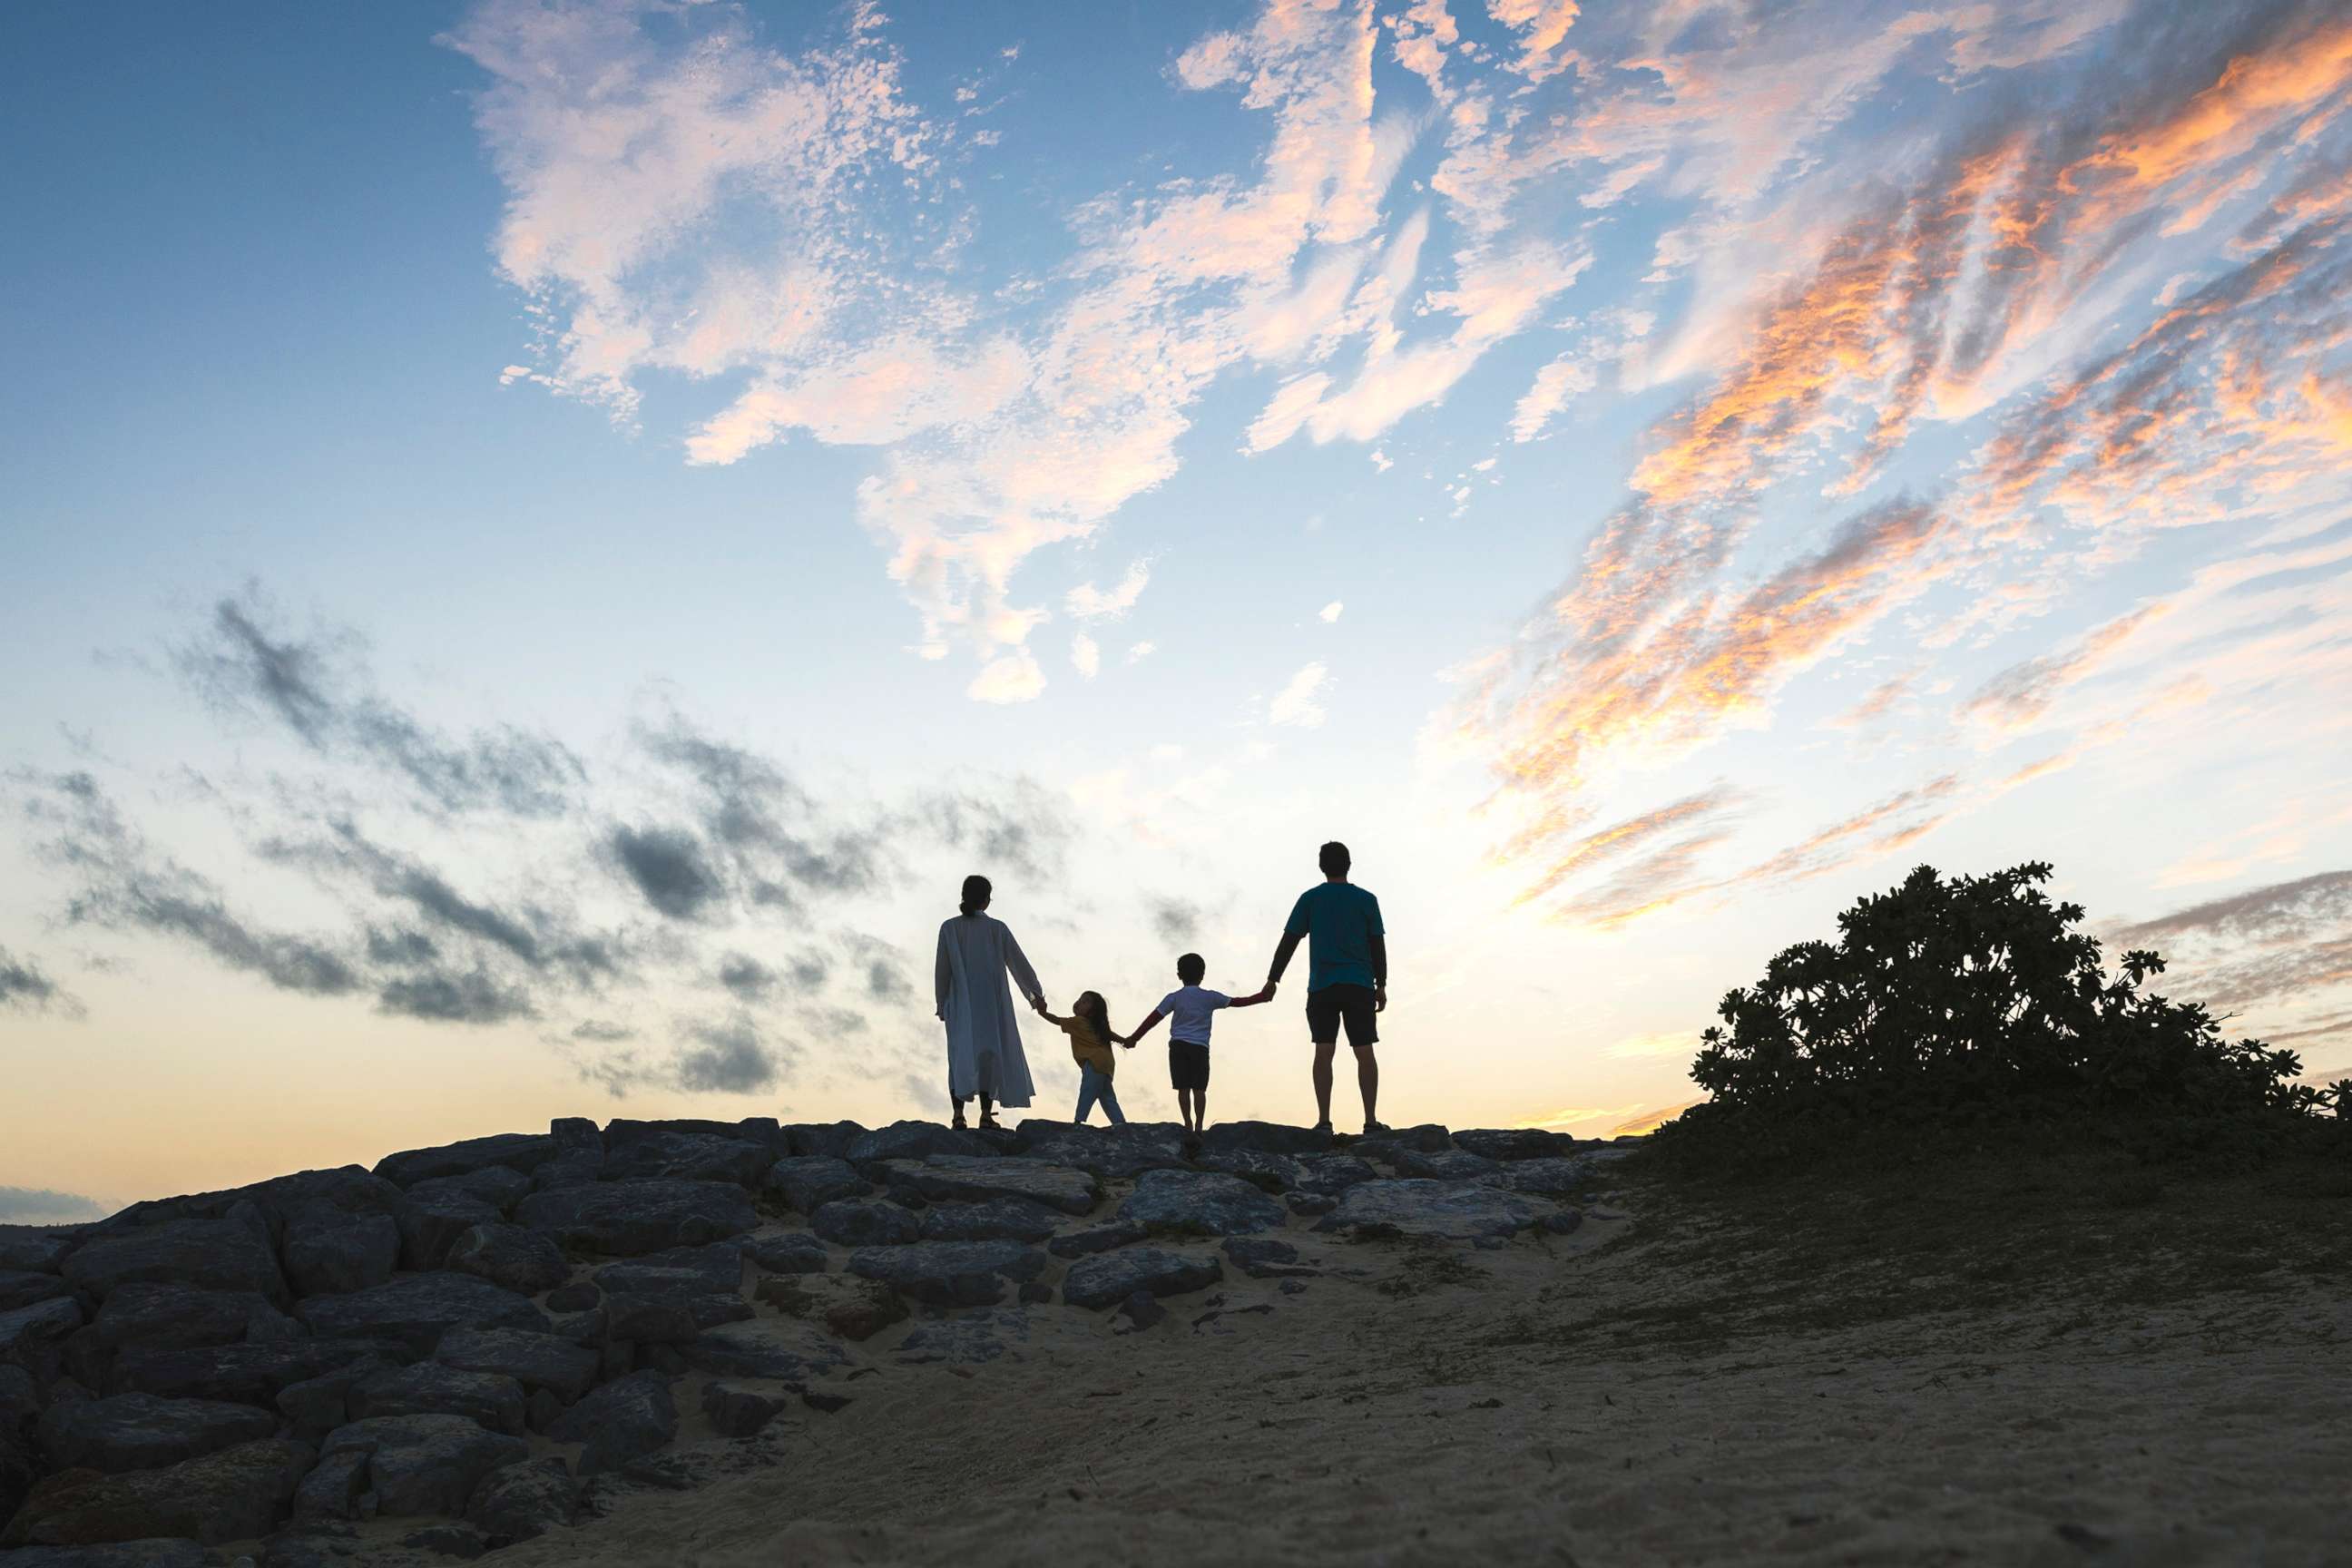 PHOTO: A family plays in the beach at sunset in Okinawa, Japan, in a stock image. 